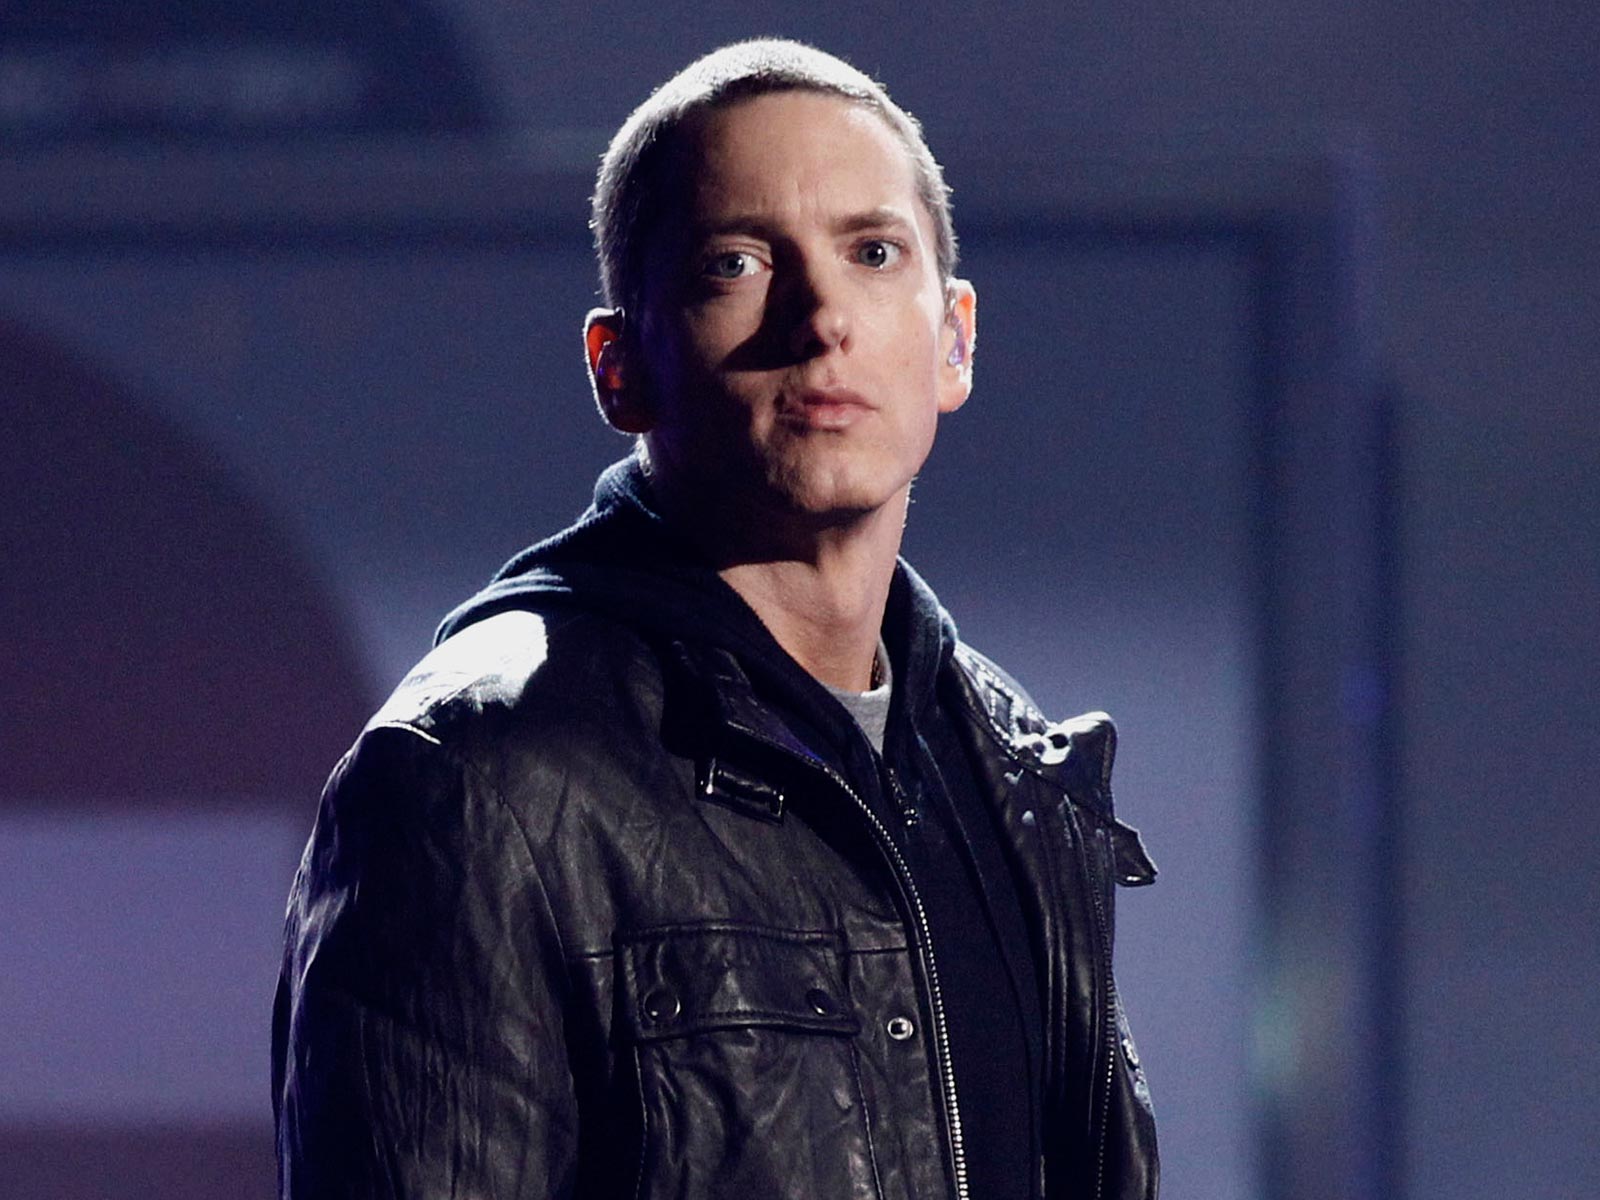 Eminem Wallpaper and Background Image | 1600x1200 | ID ...